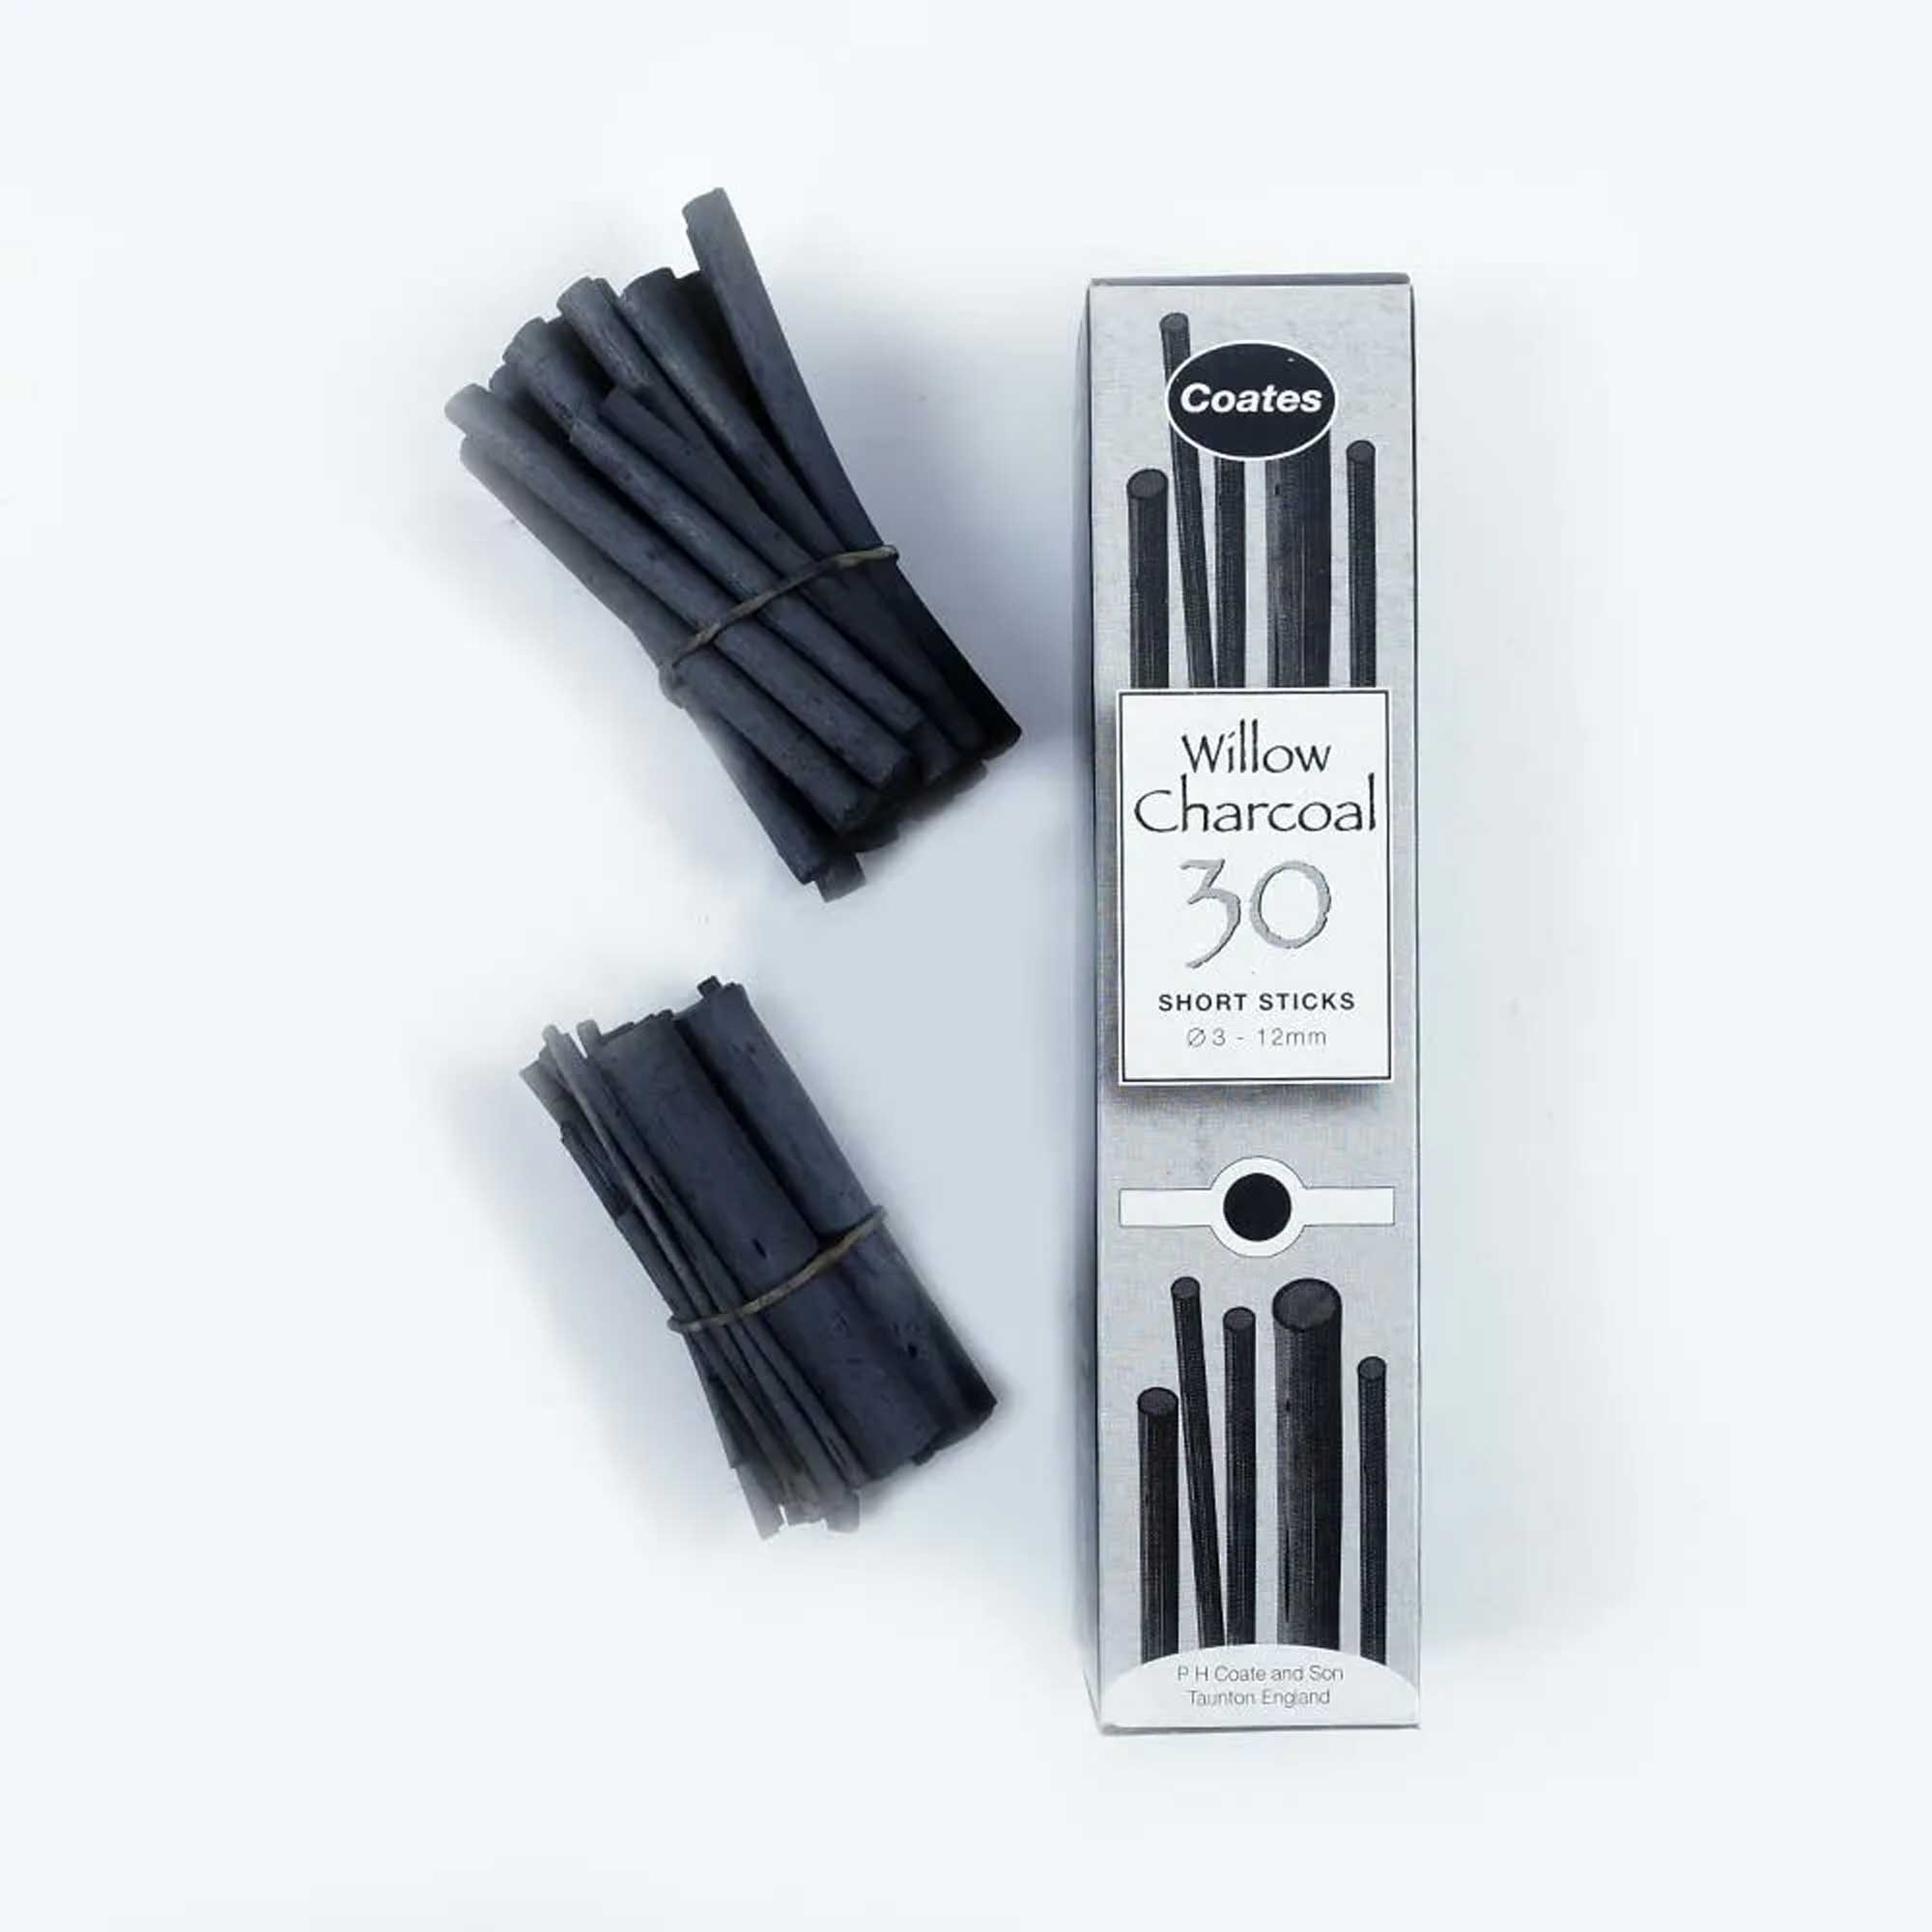 Coates Willow Charcoal 30 Assorted Short Sticks (3- 12mm) Media 1 of 2